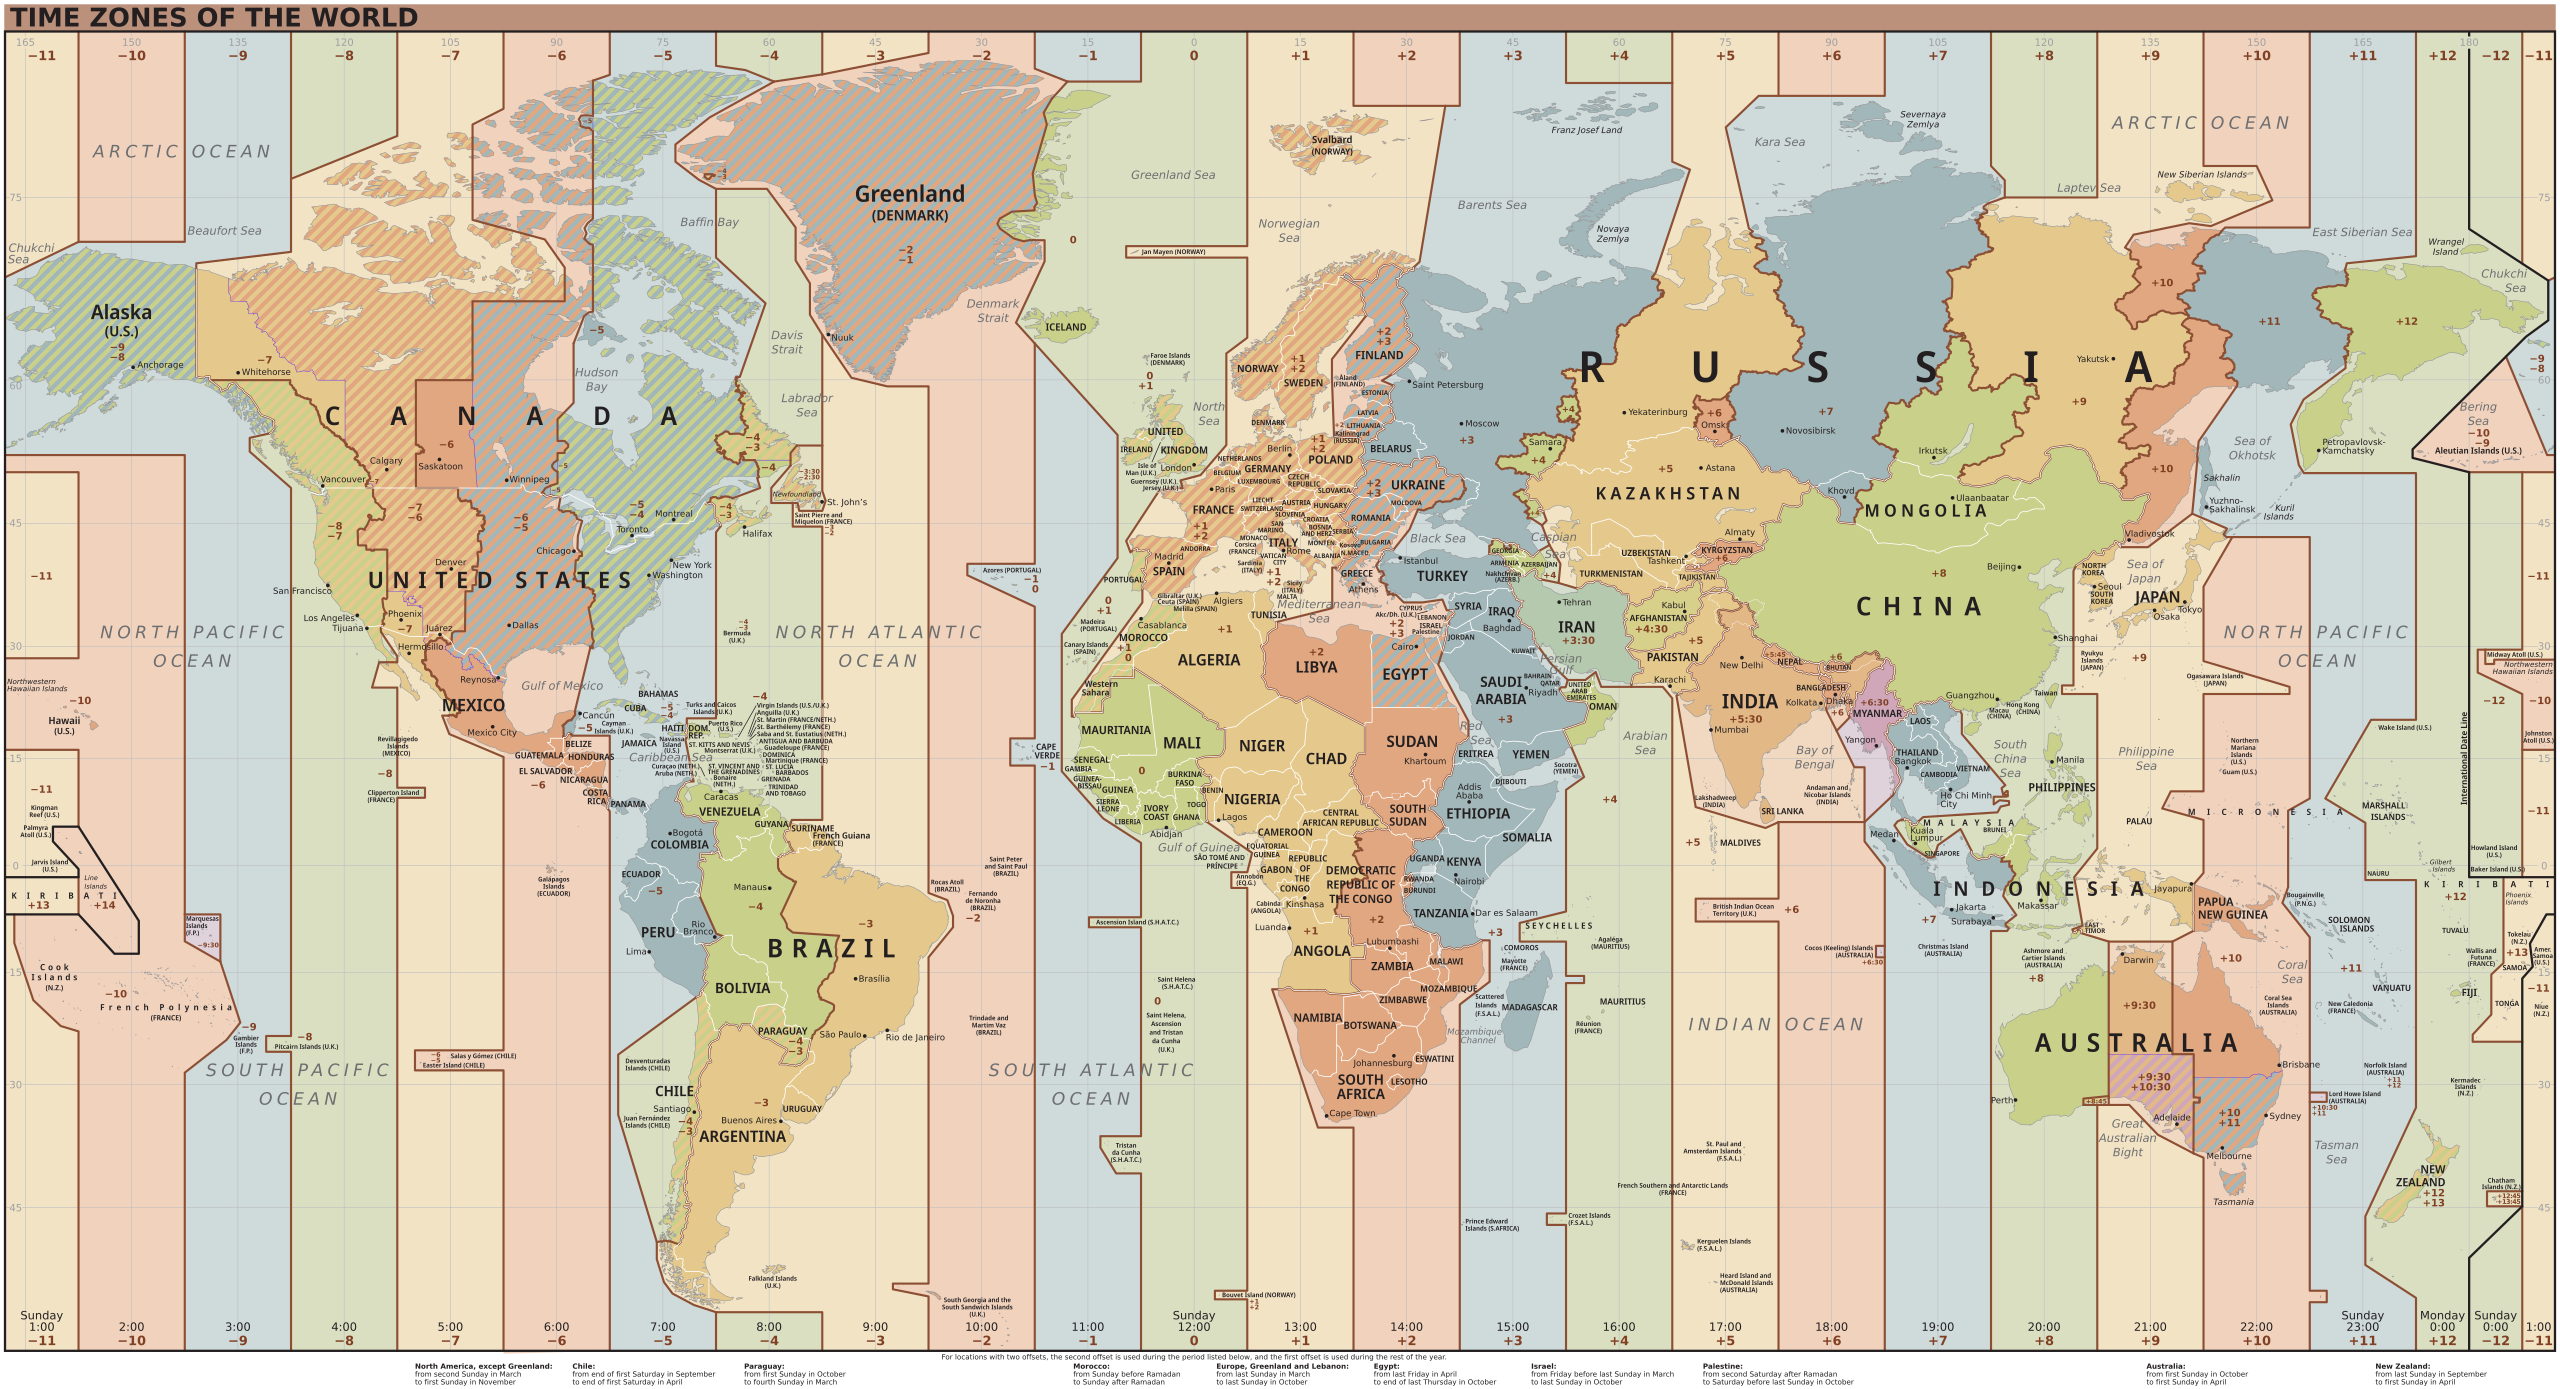 2560px-World_Time_Zones_Map.svg.png